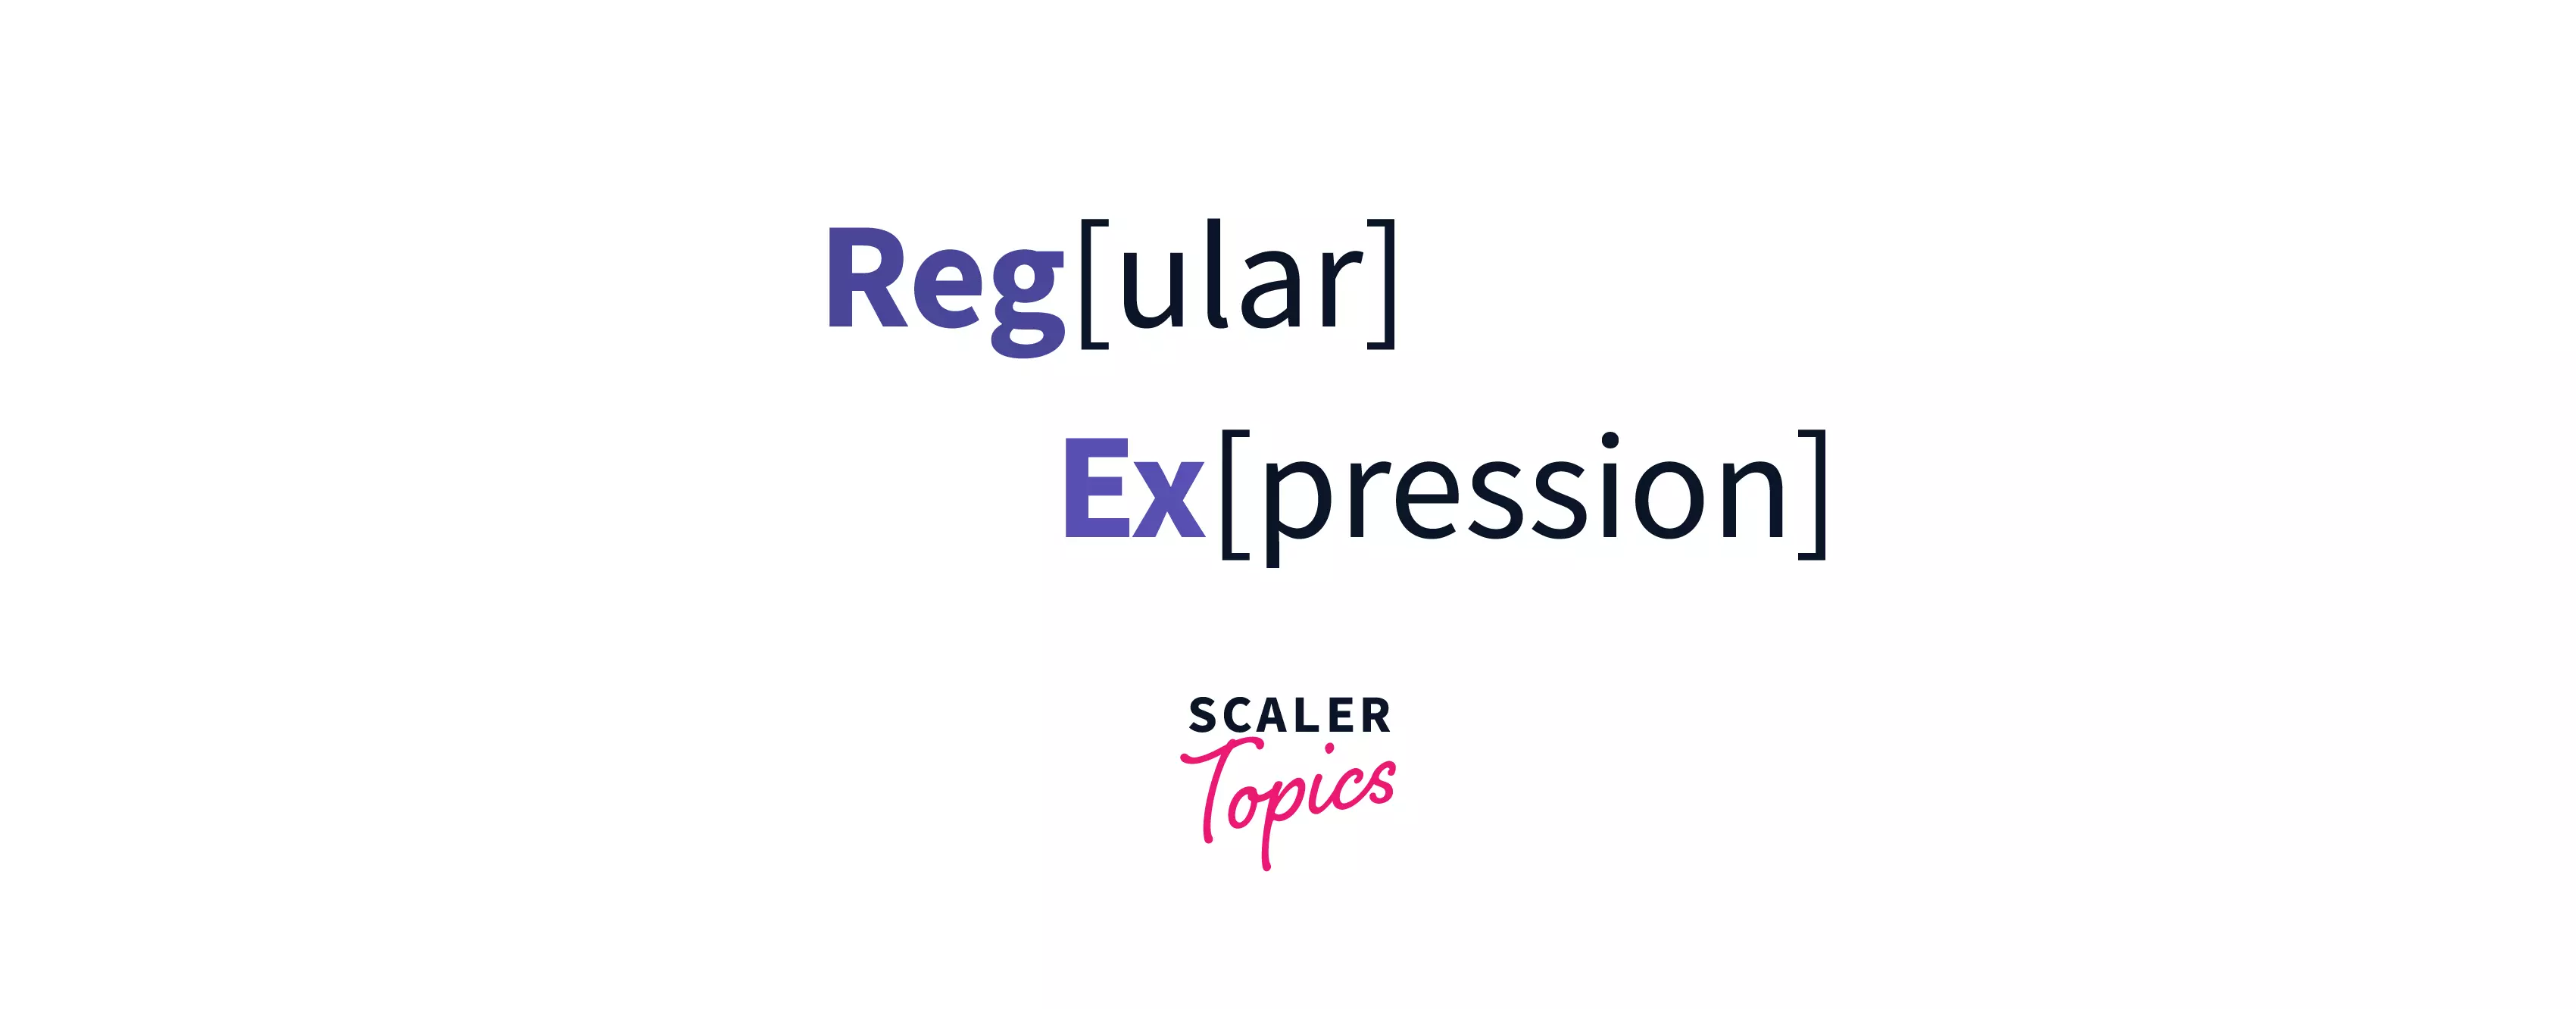 regular expressions in Python